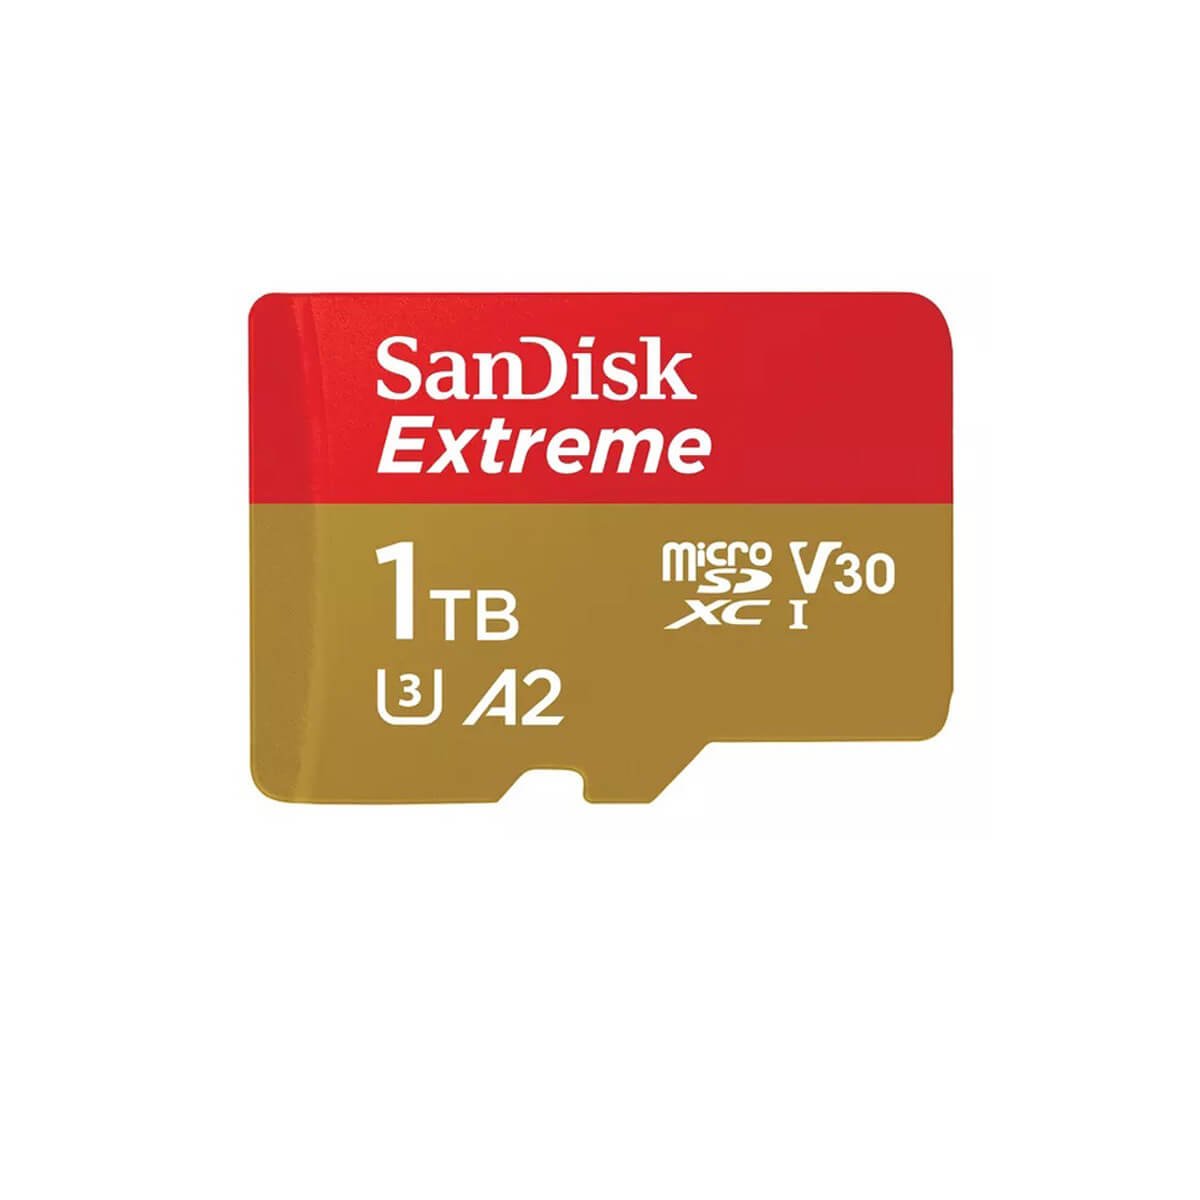 1TB MicroSD Card is now available for sale